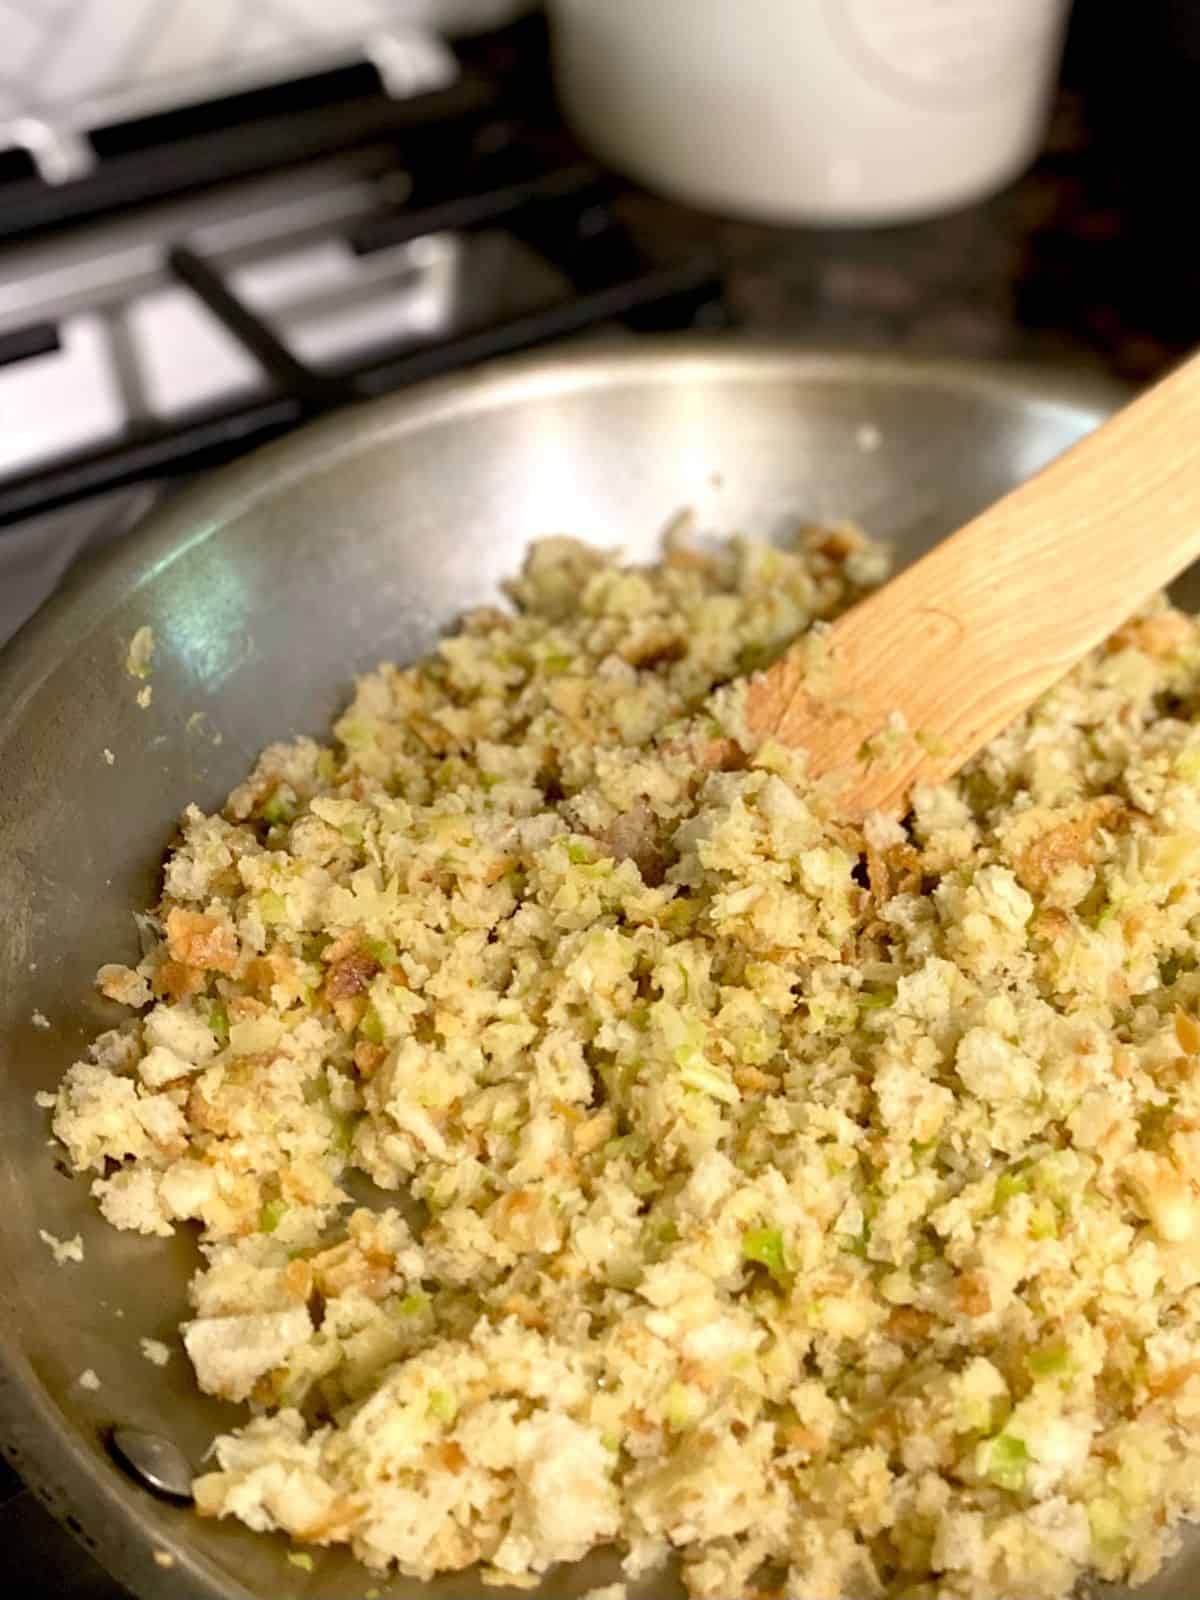 stirring sourdough crumbs into celery and onion